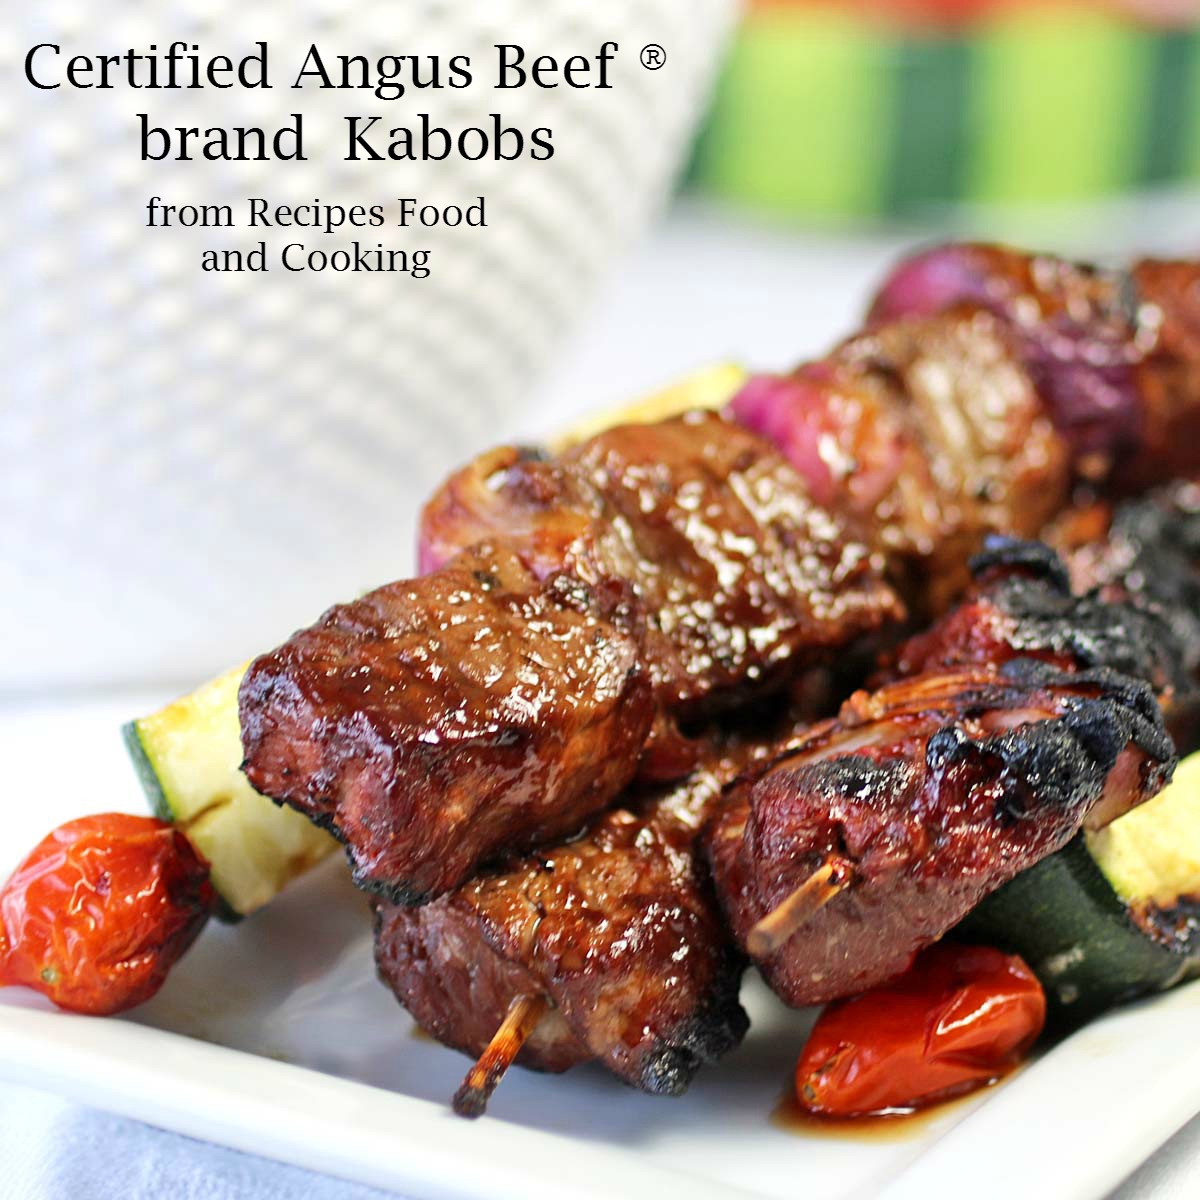 Certified Angus Beef ® brand Kabobs